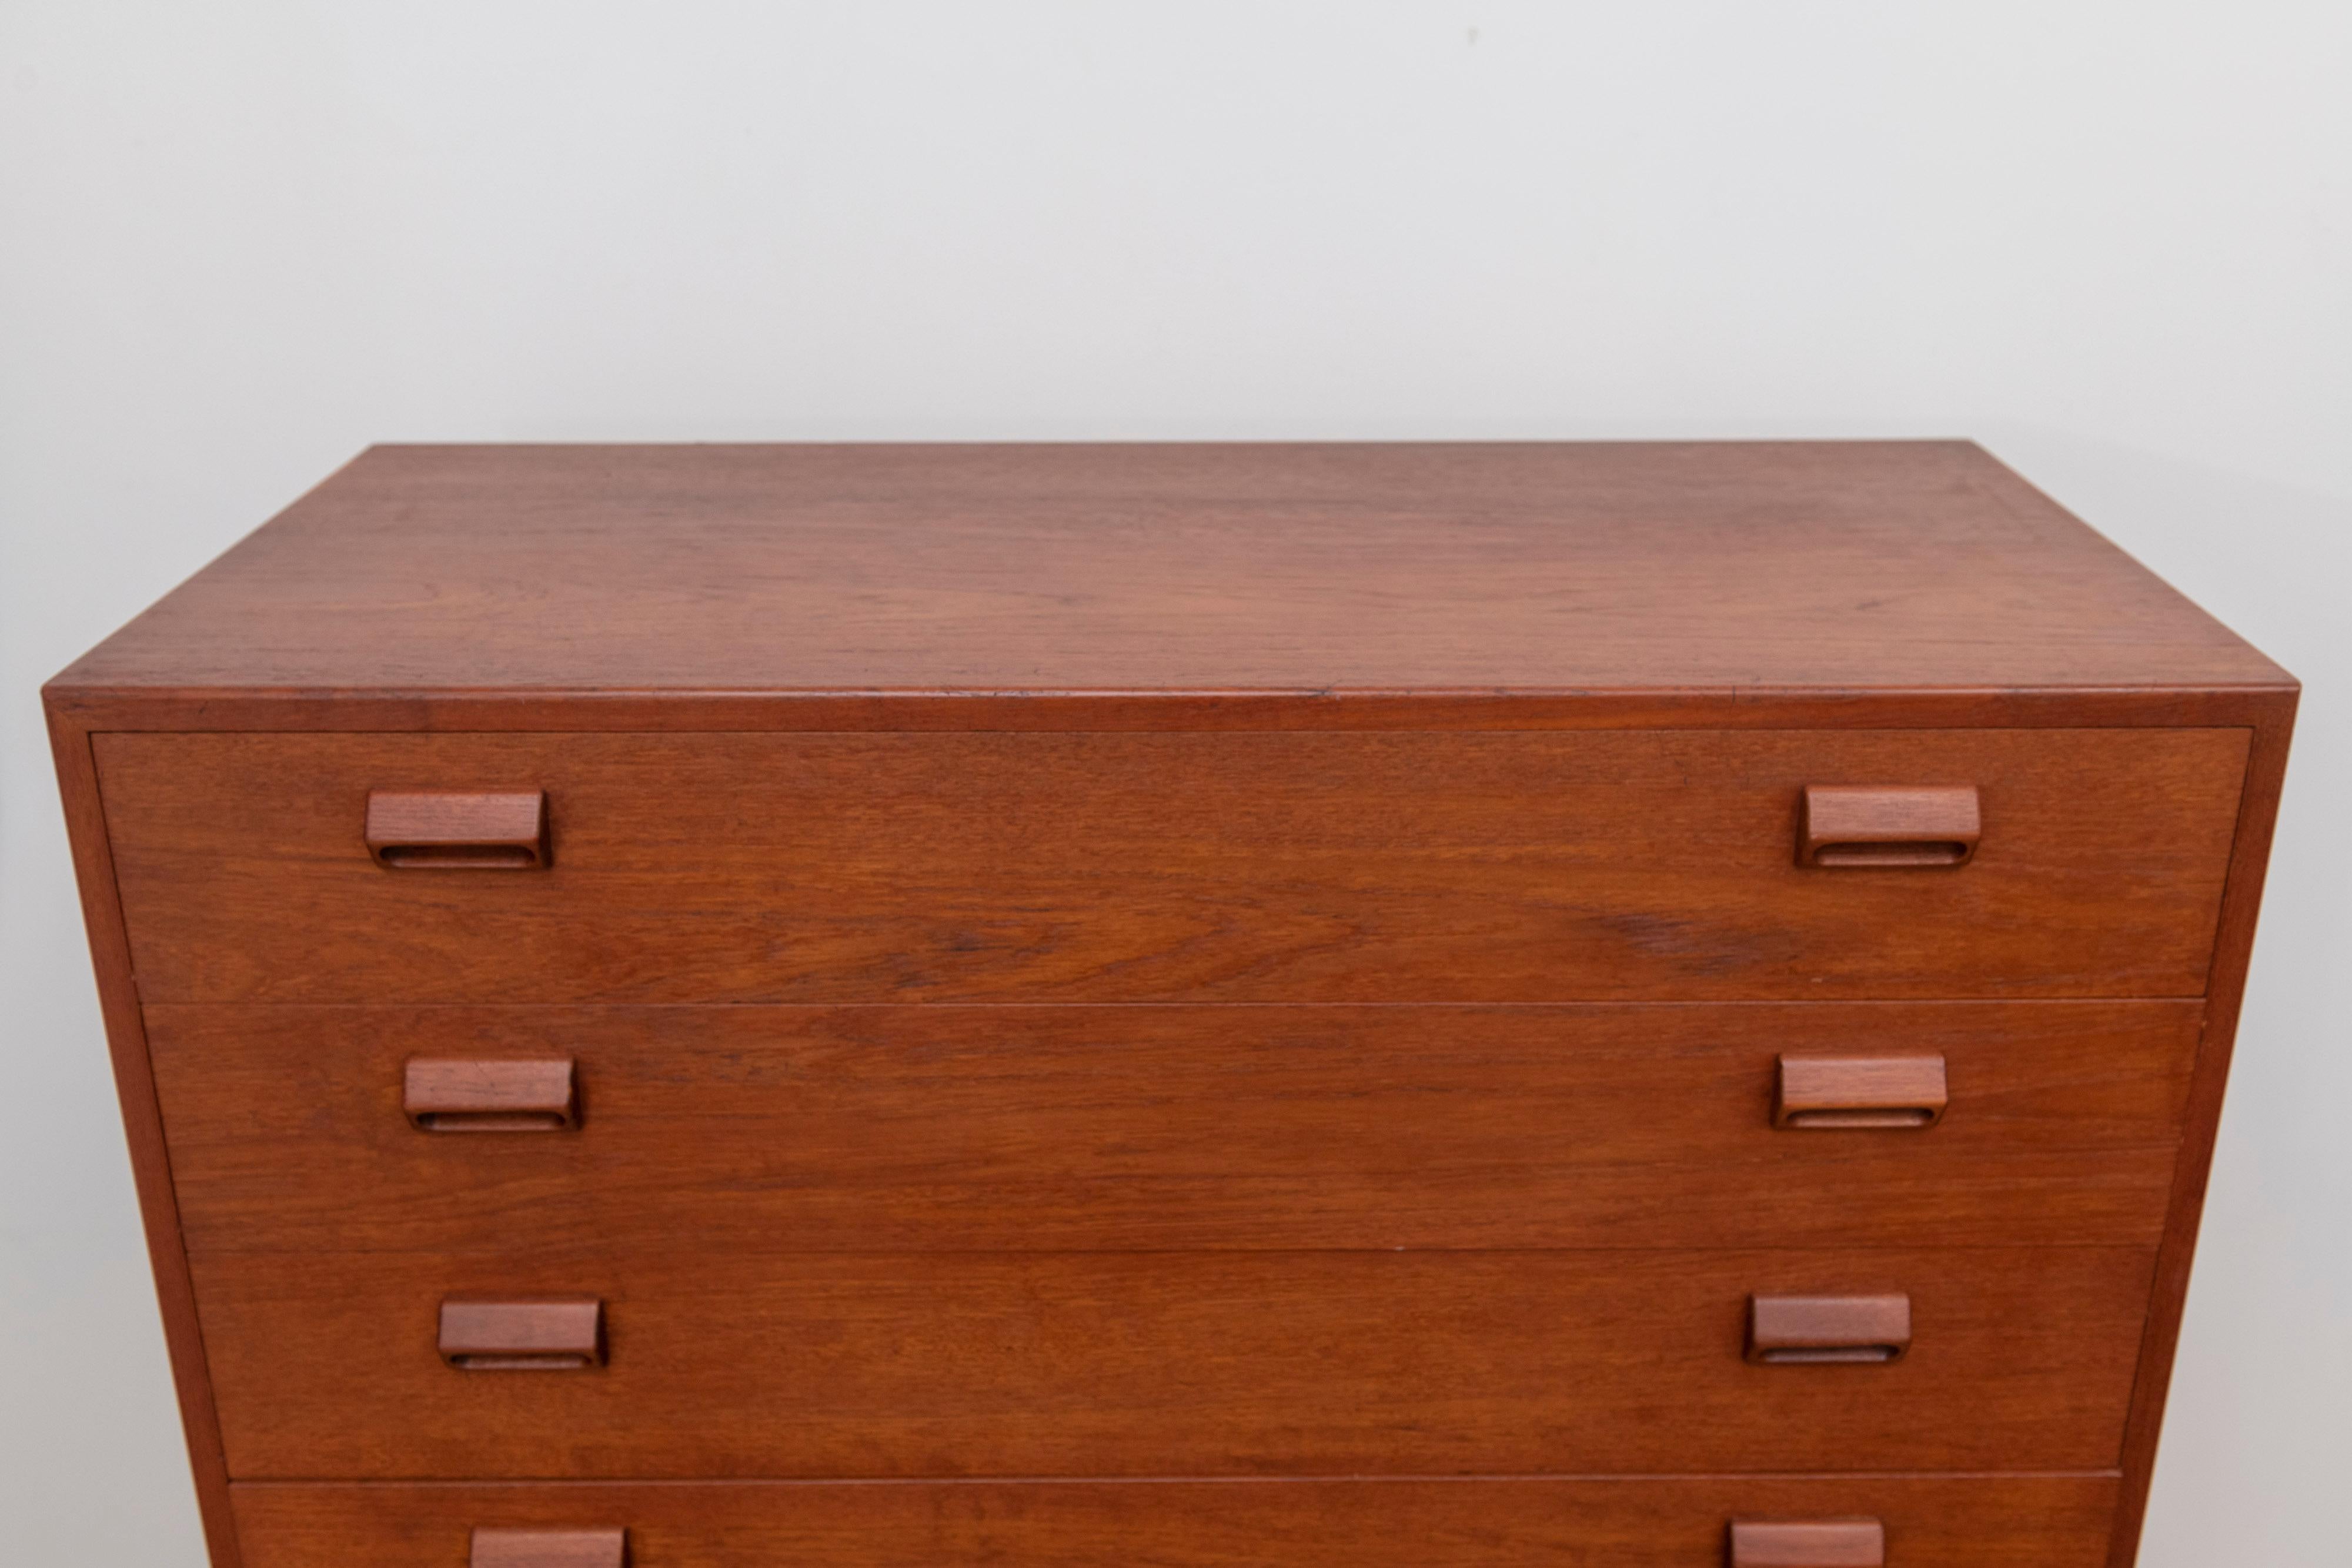 Borge Mogensen Teak Chest of Drawers In Excellent Condition For Sale In San Francisco, CA